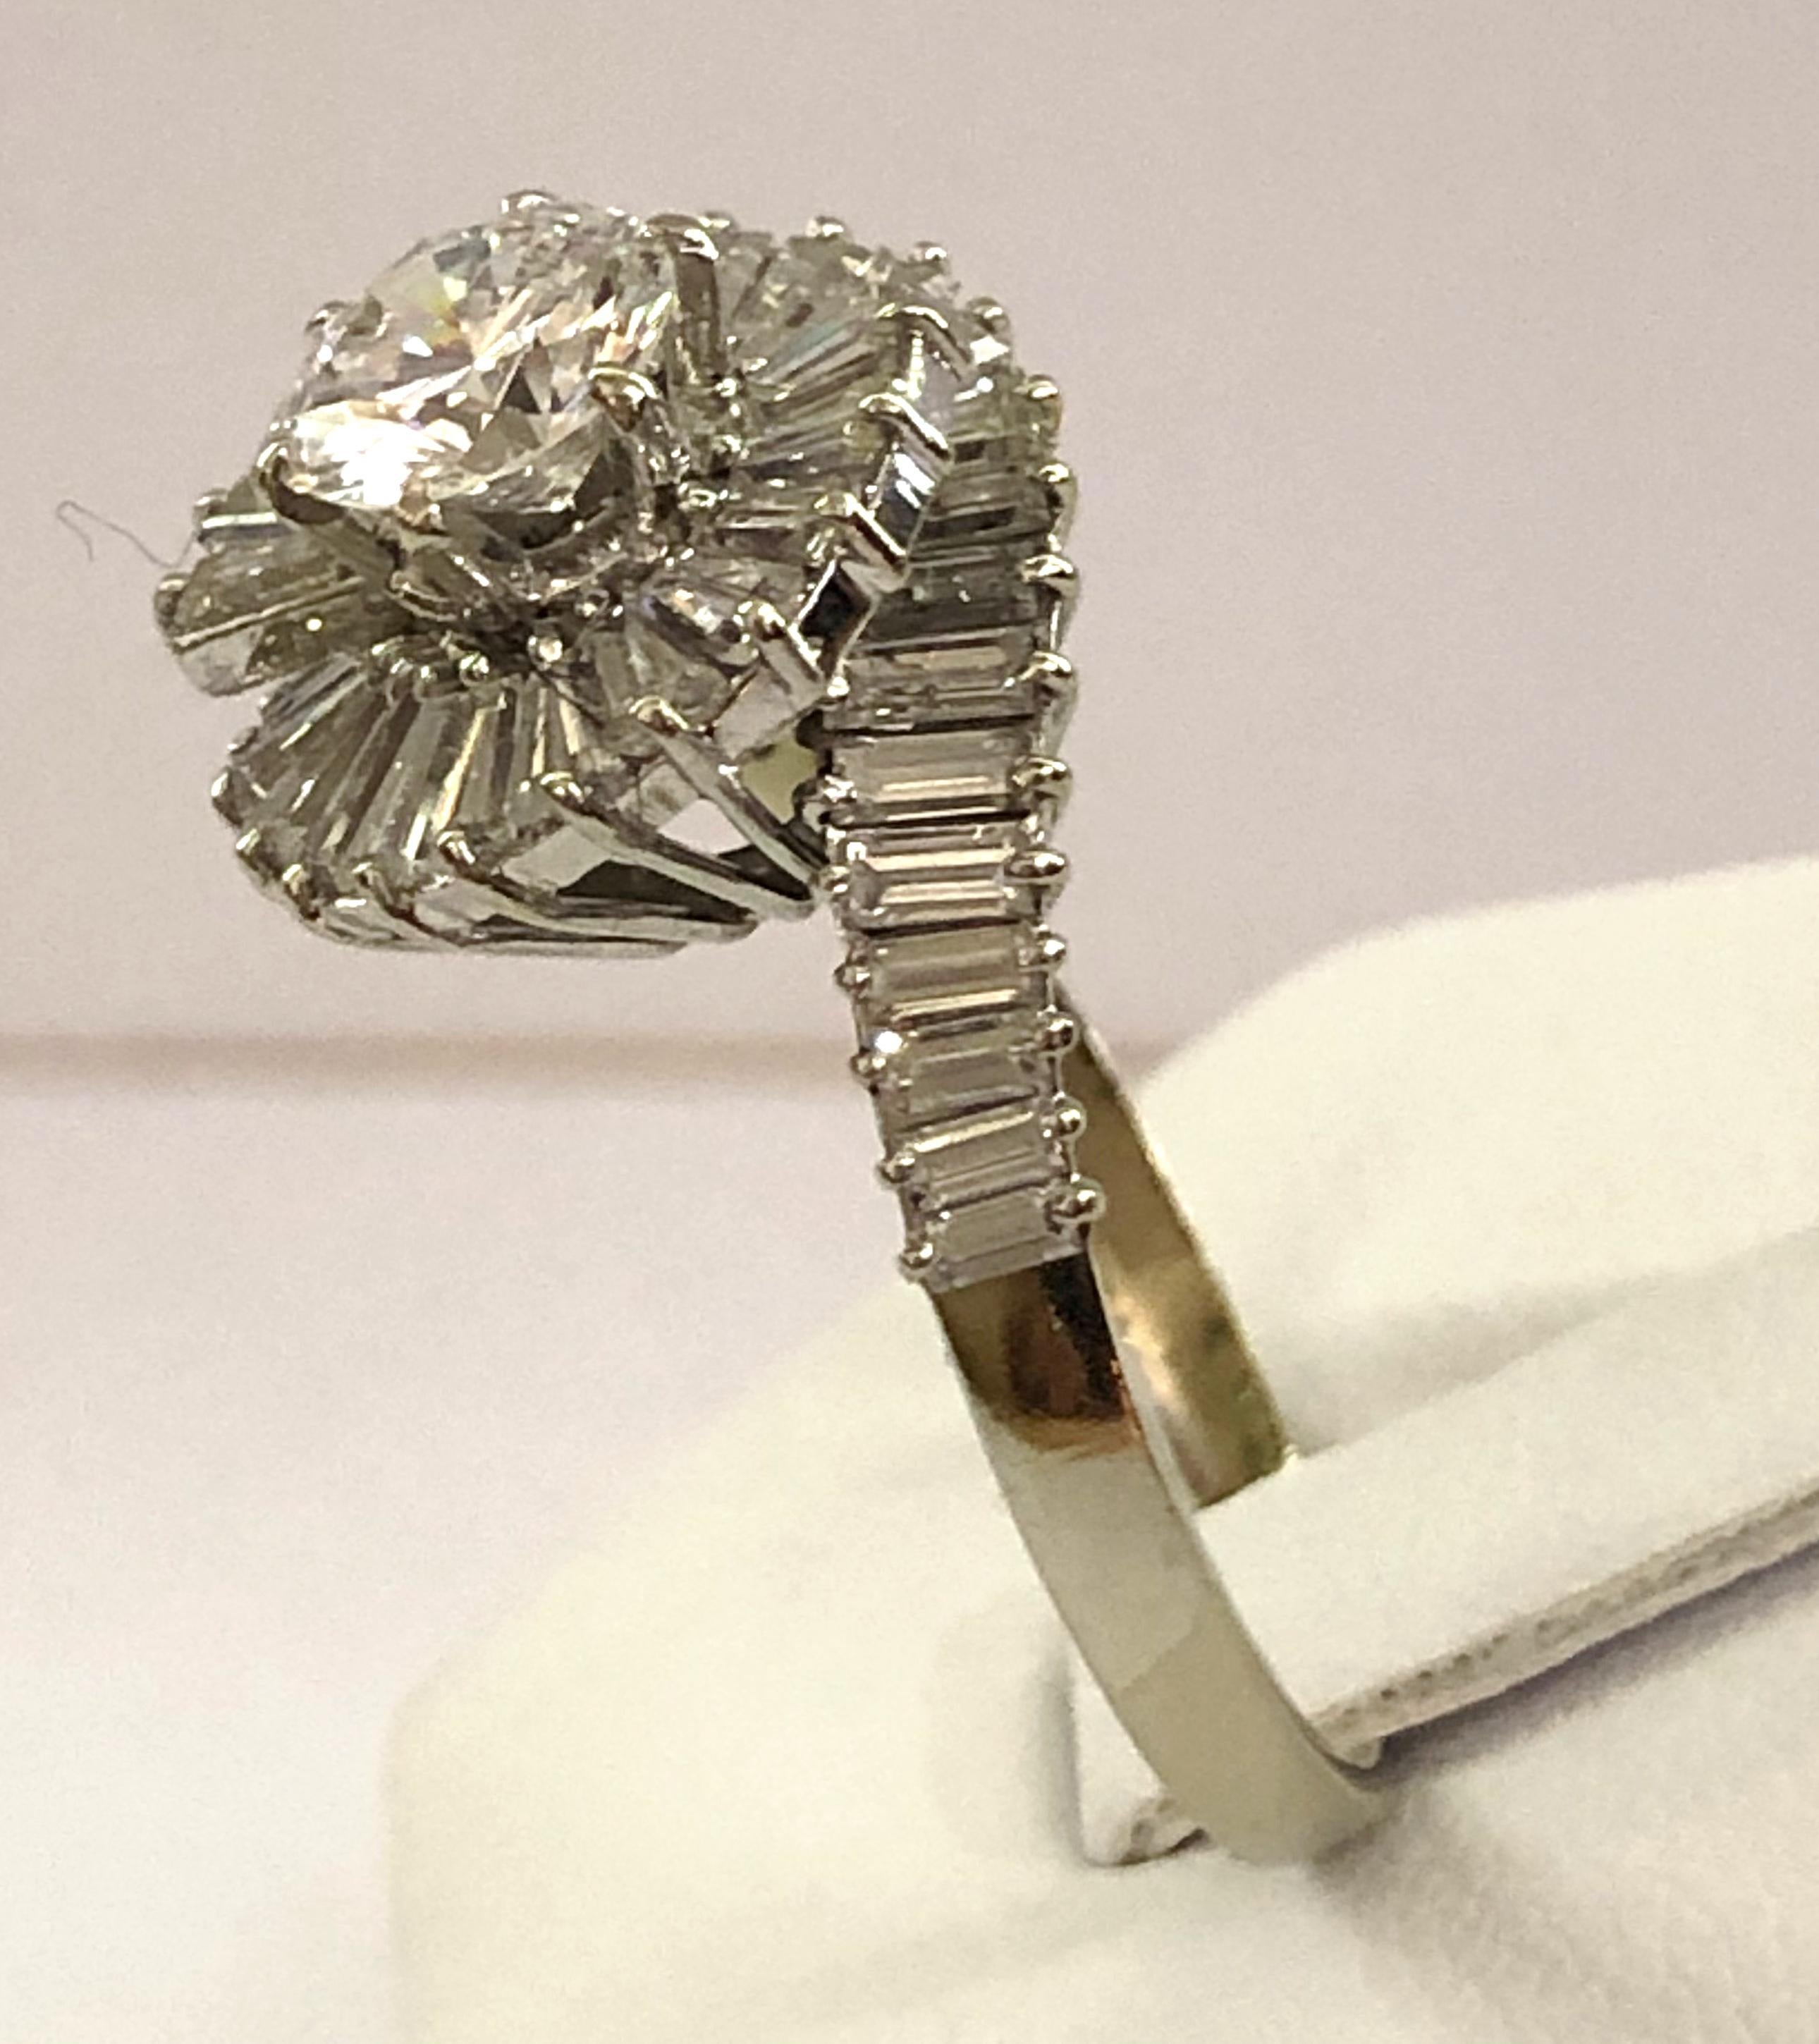 Vintage 18 karat white gold ring, with a central large brilliant diamond of 1 karat, surrounded by tapered diamonds for a total of 2.5 karats, Italy 1950s
Ring size US 9